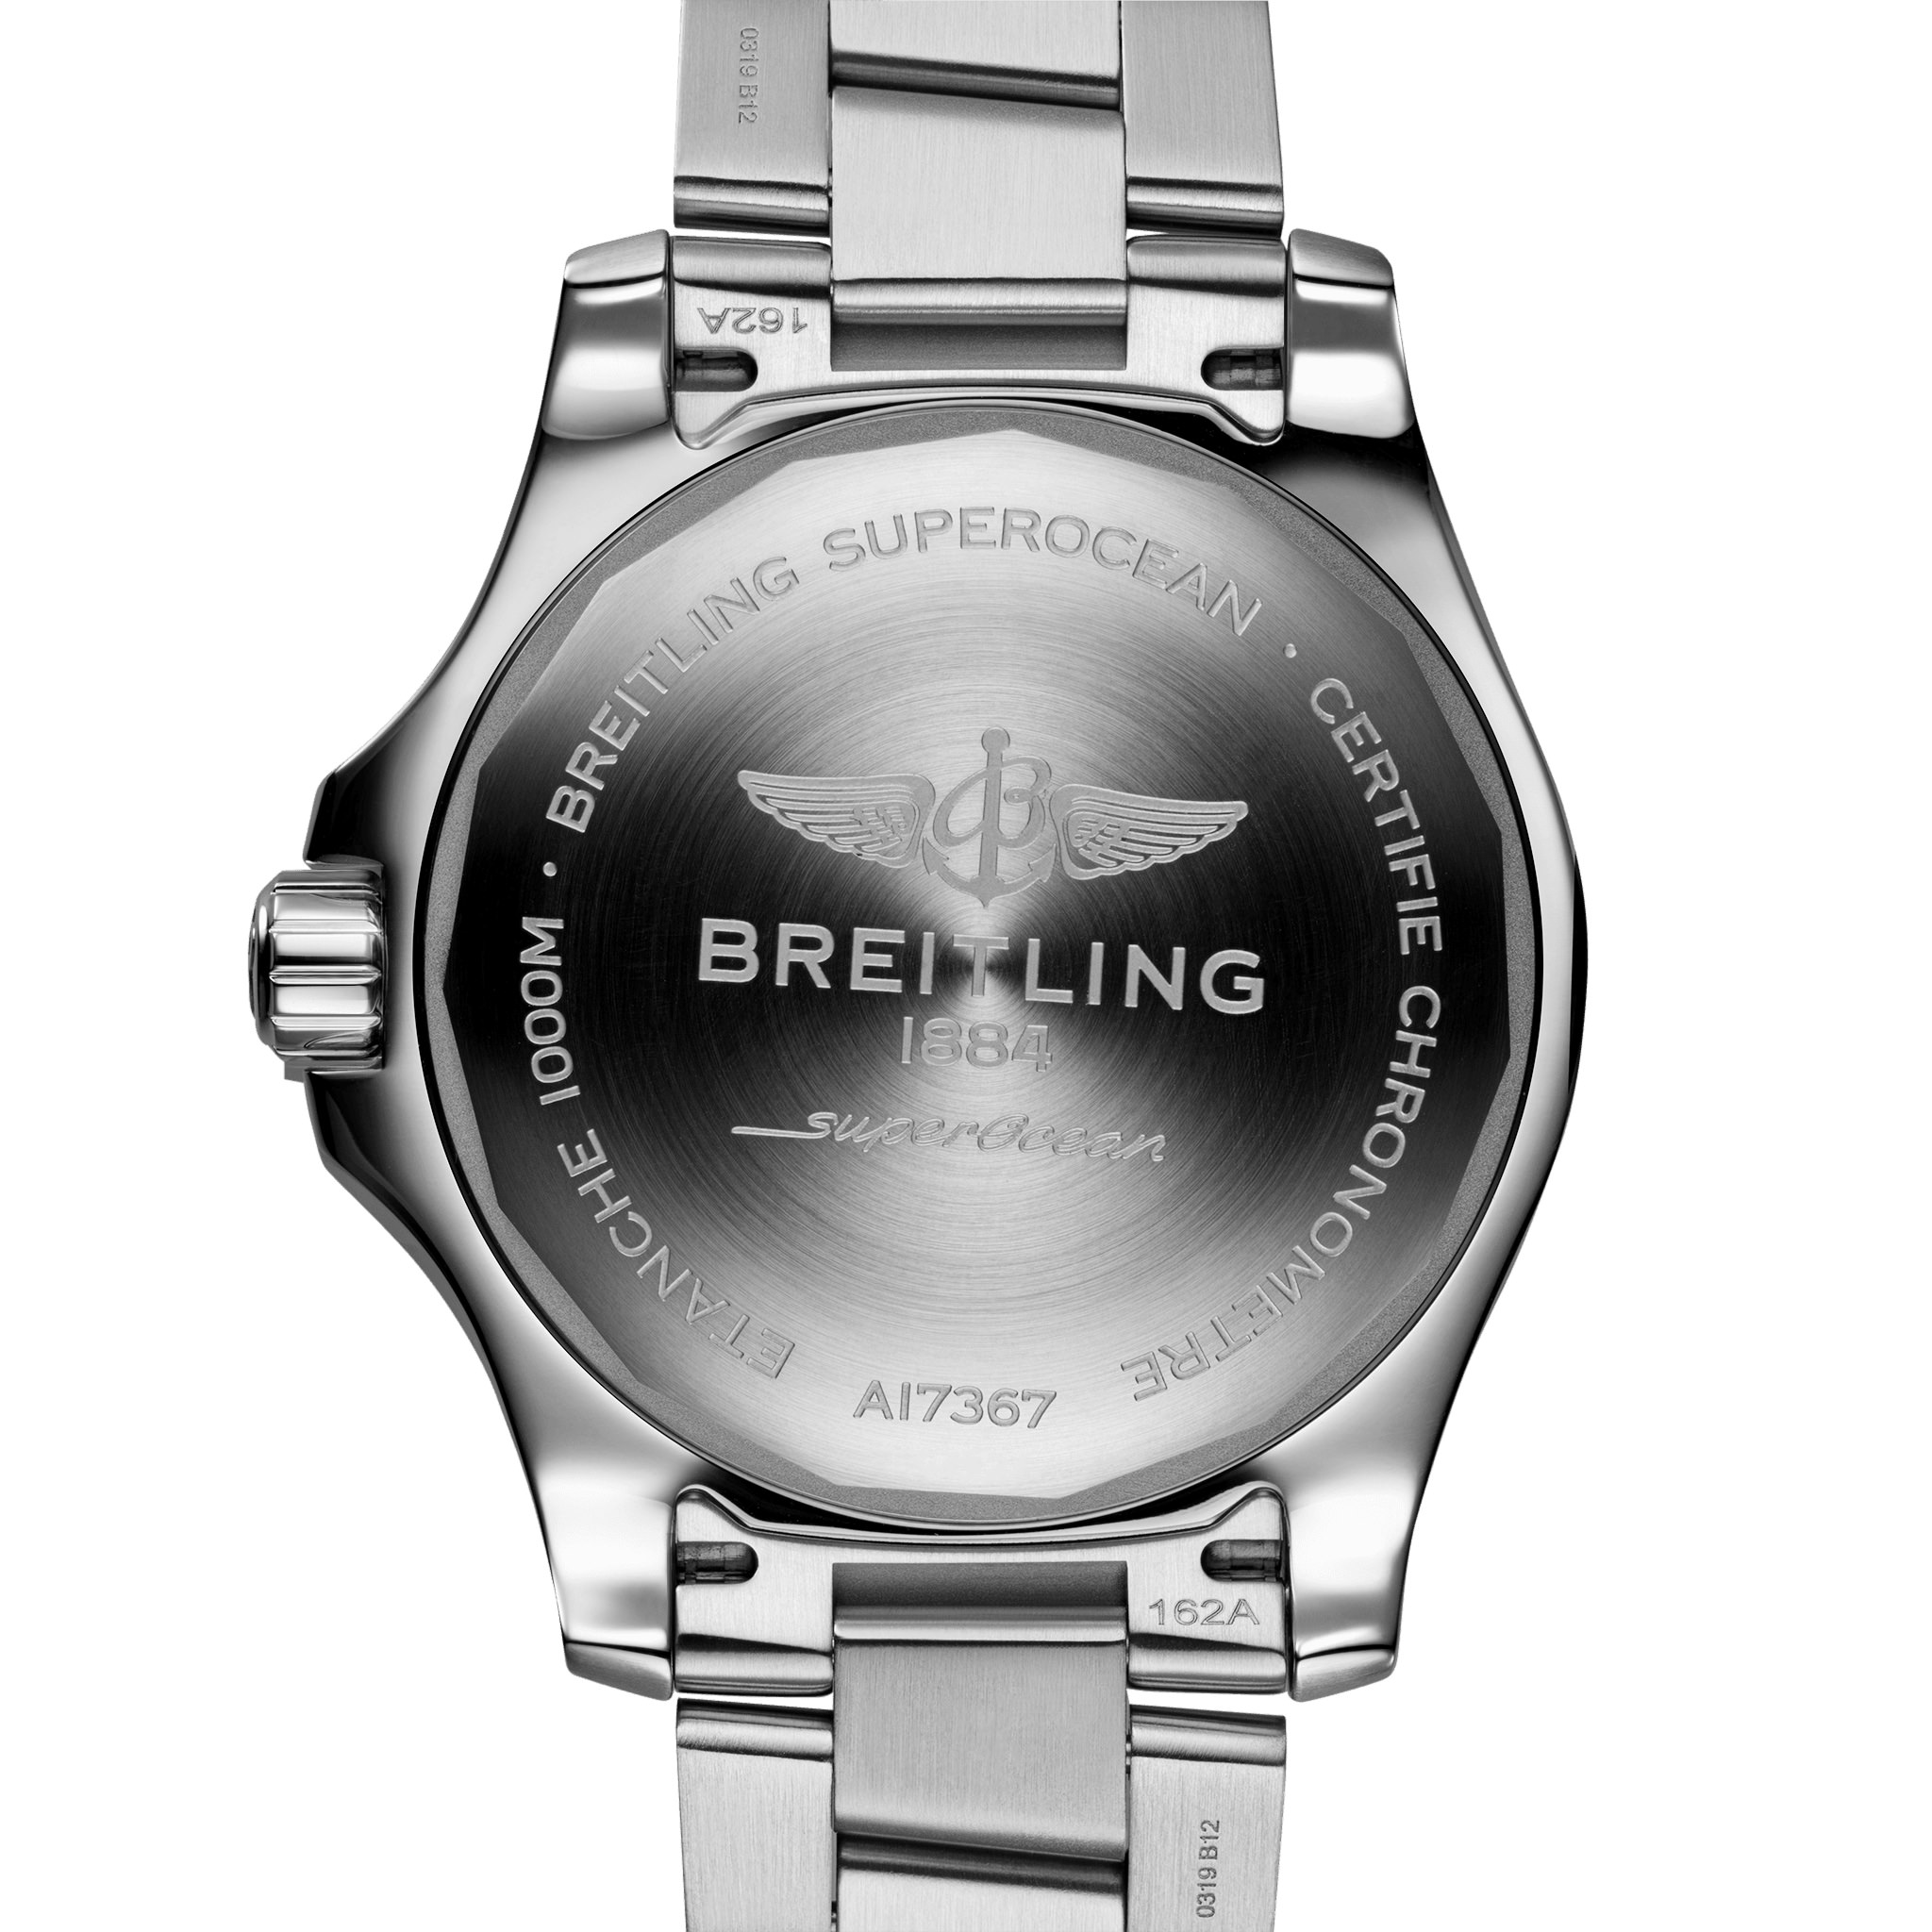 The Breitling Superocean Automatic 44